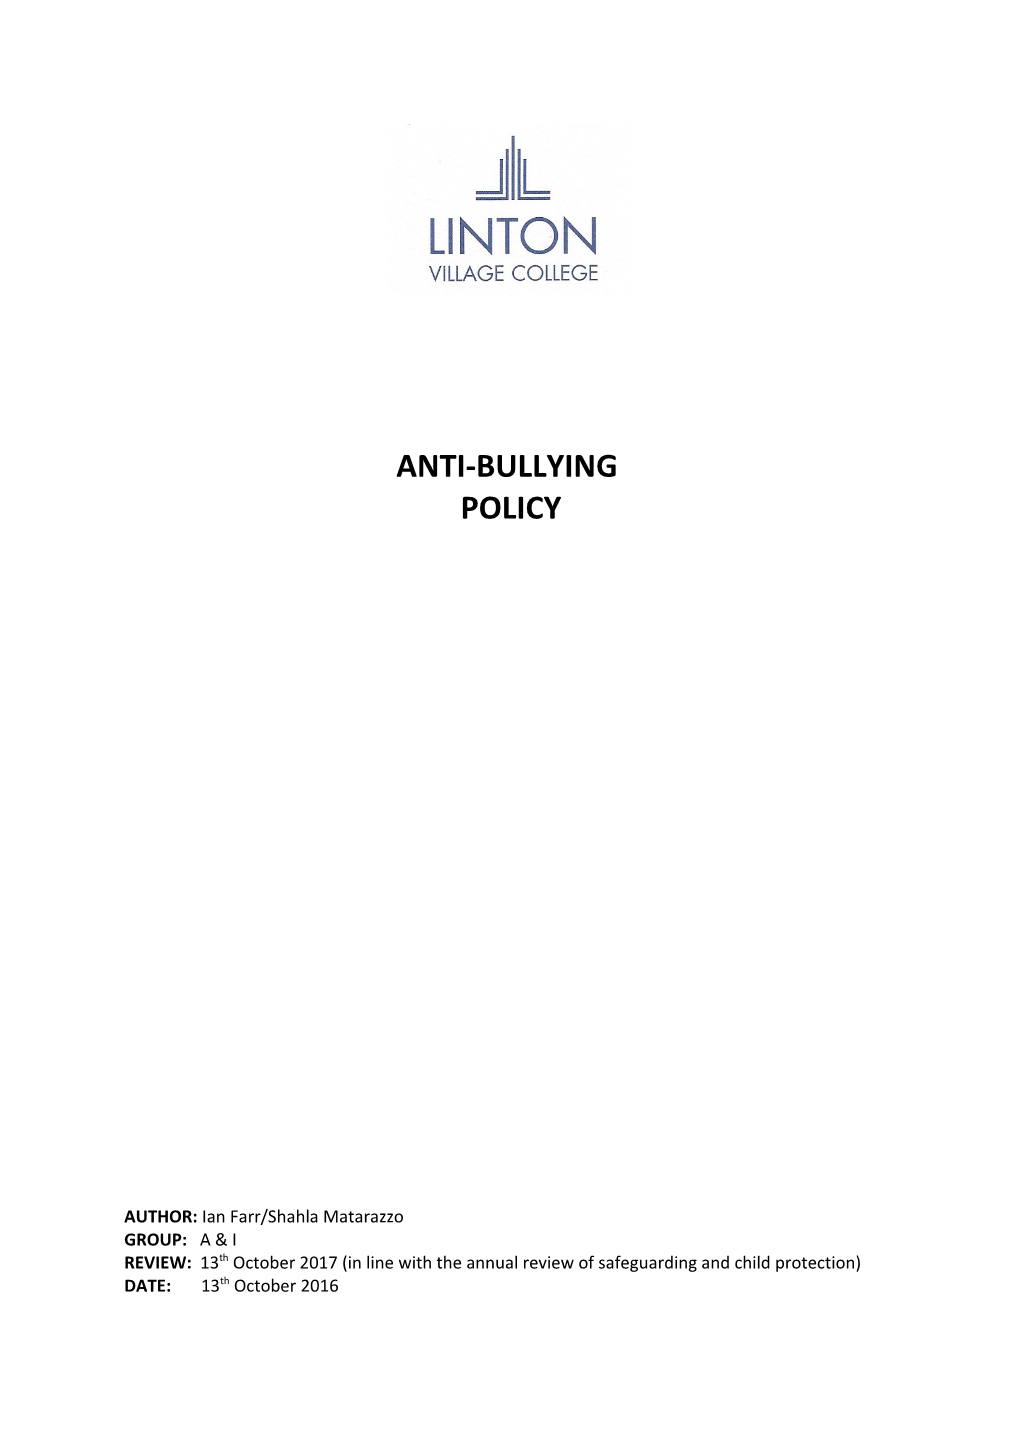 Draft Linton Village College Anti Bullying Policy